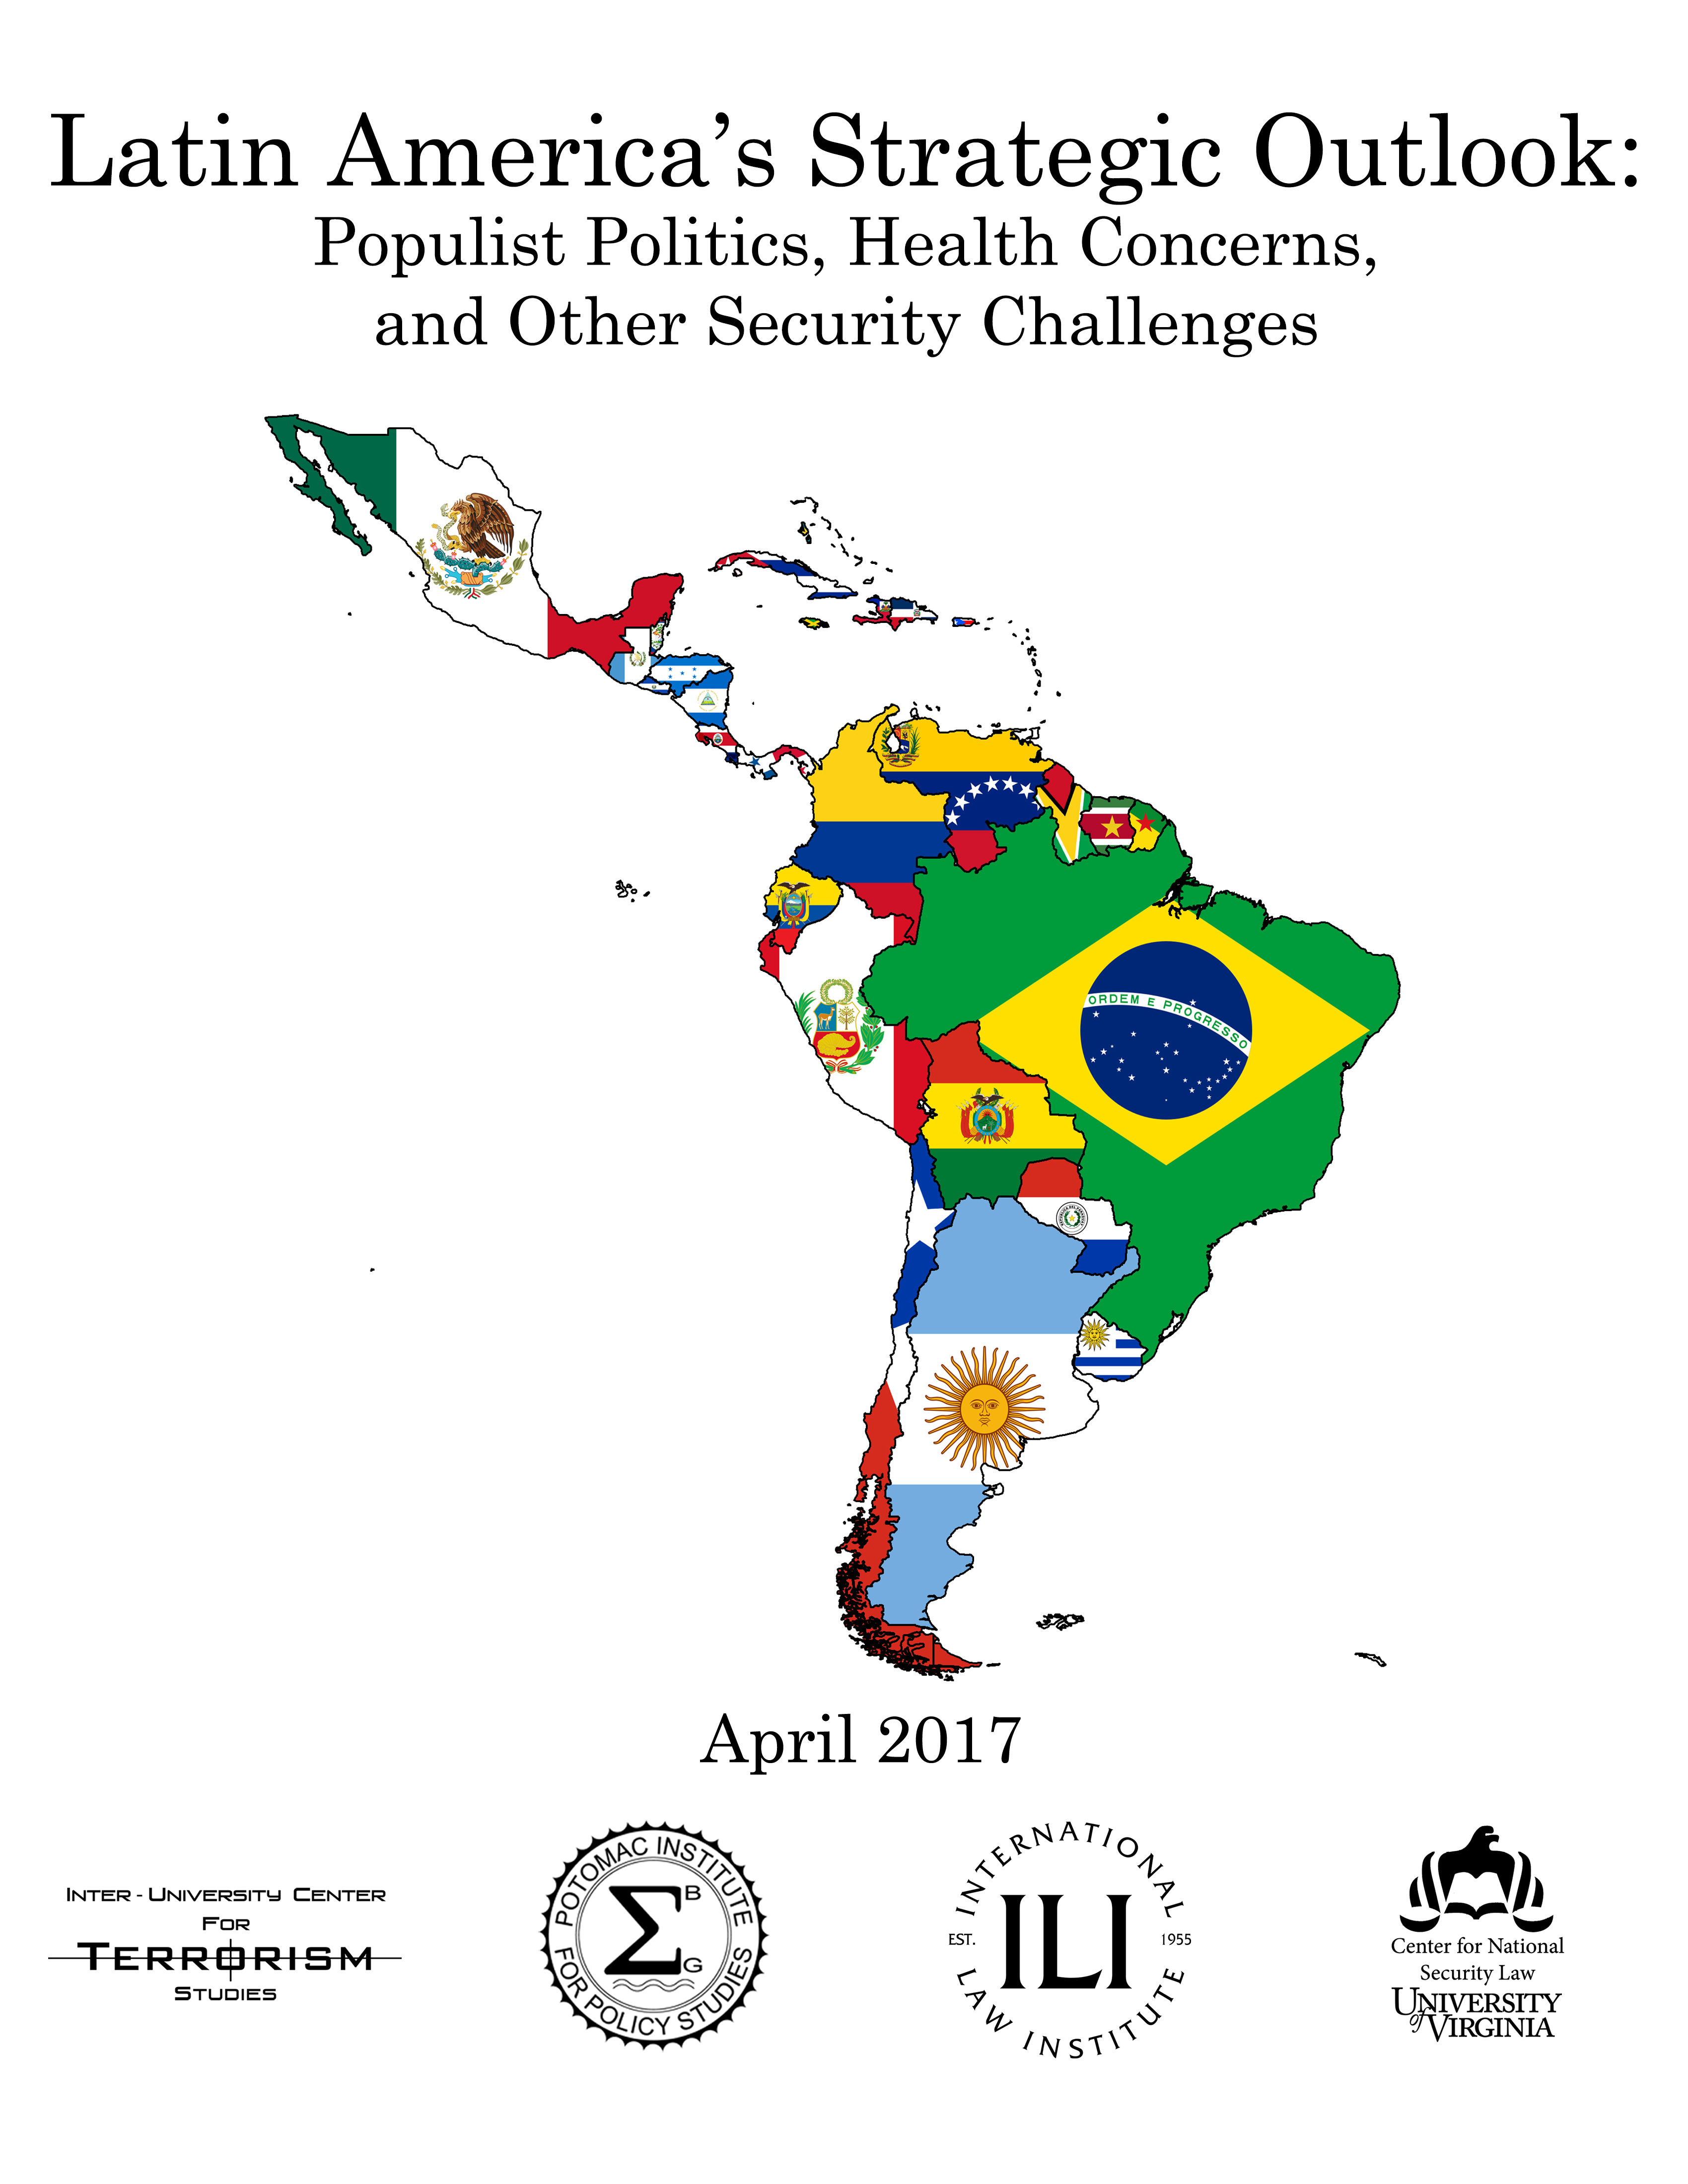 Latin America’s Strategic Outlook: Populist Politics, Health Concerns, and Other Security Challenges